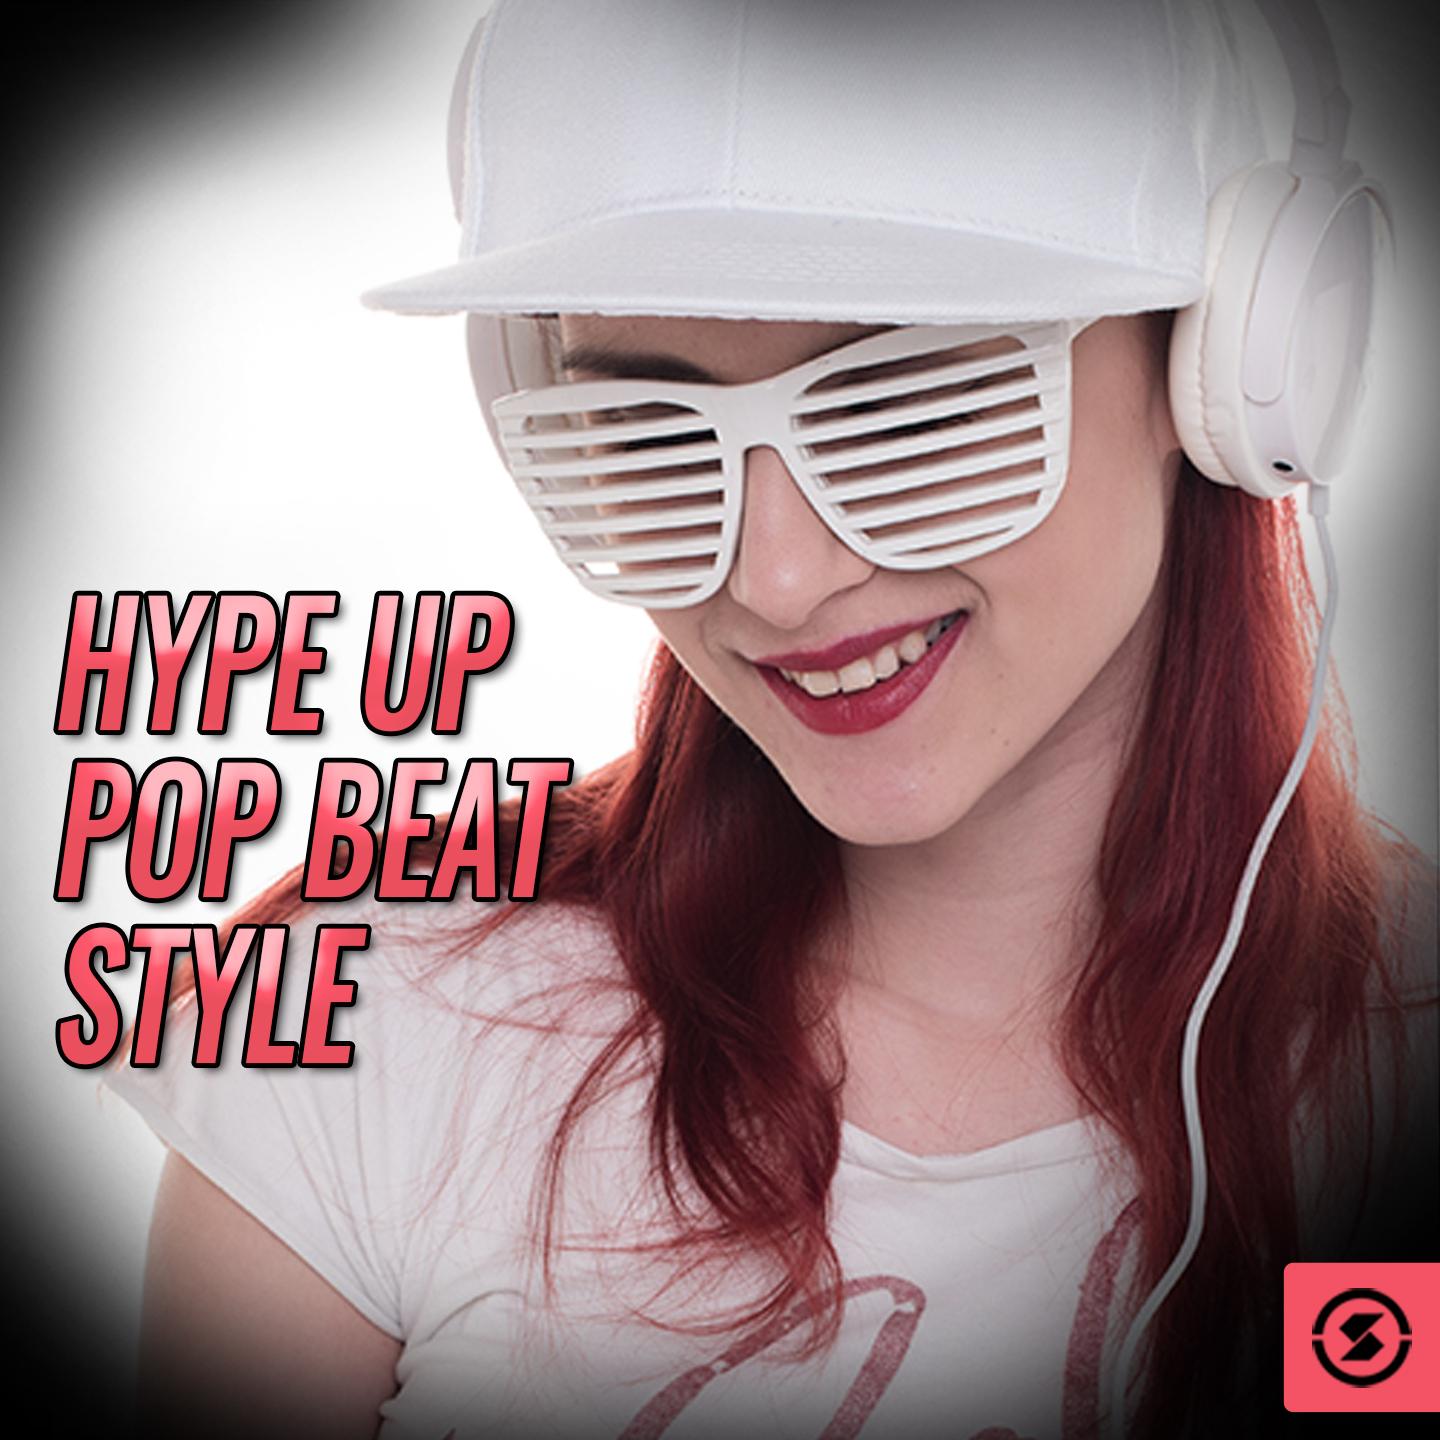 Hype Up Pop Beat Style